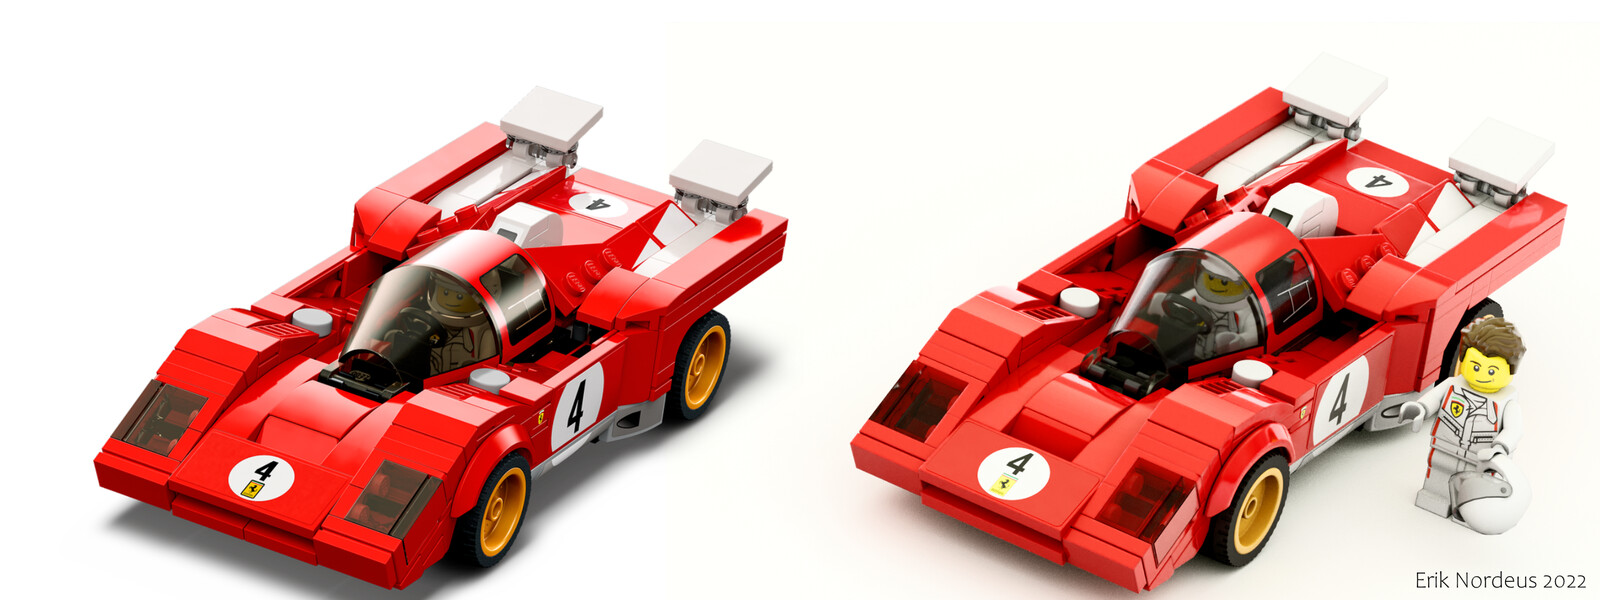 Digital 1970 Ferrari 512 M LEGO model that exists in real life: the left one is from the LEGO website and the right one is by me. I actually think they use digital models on the website as well because the left one is too smooth to be real. 